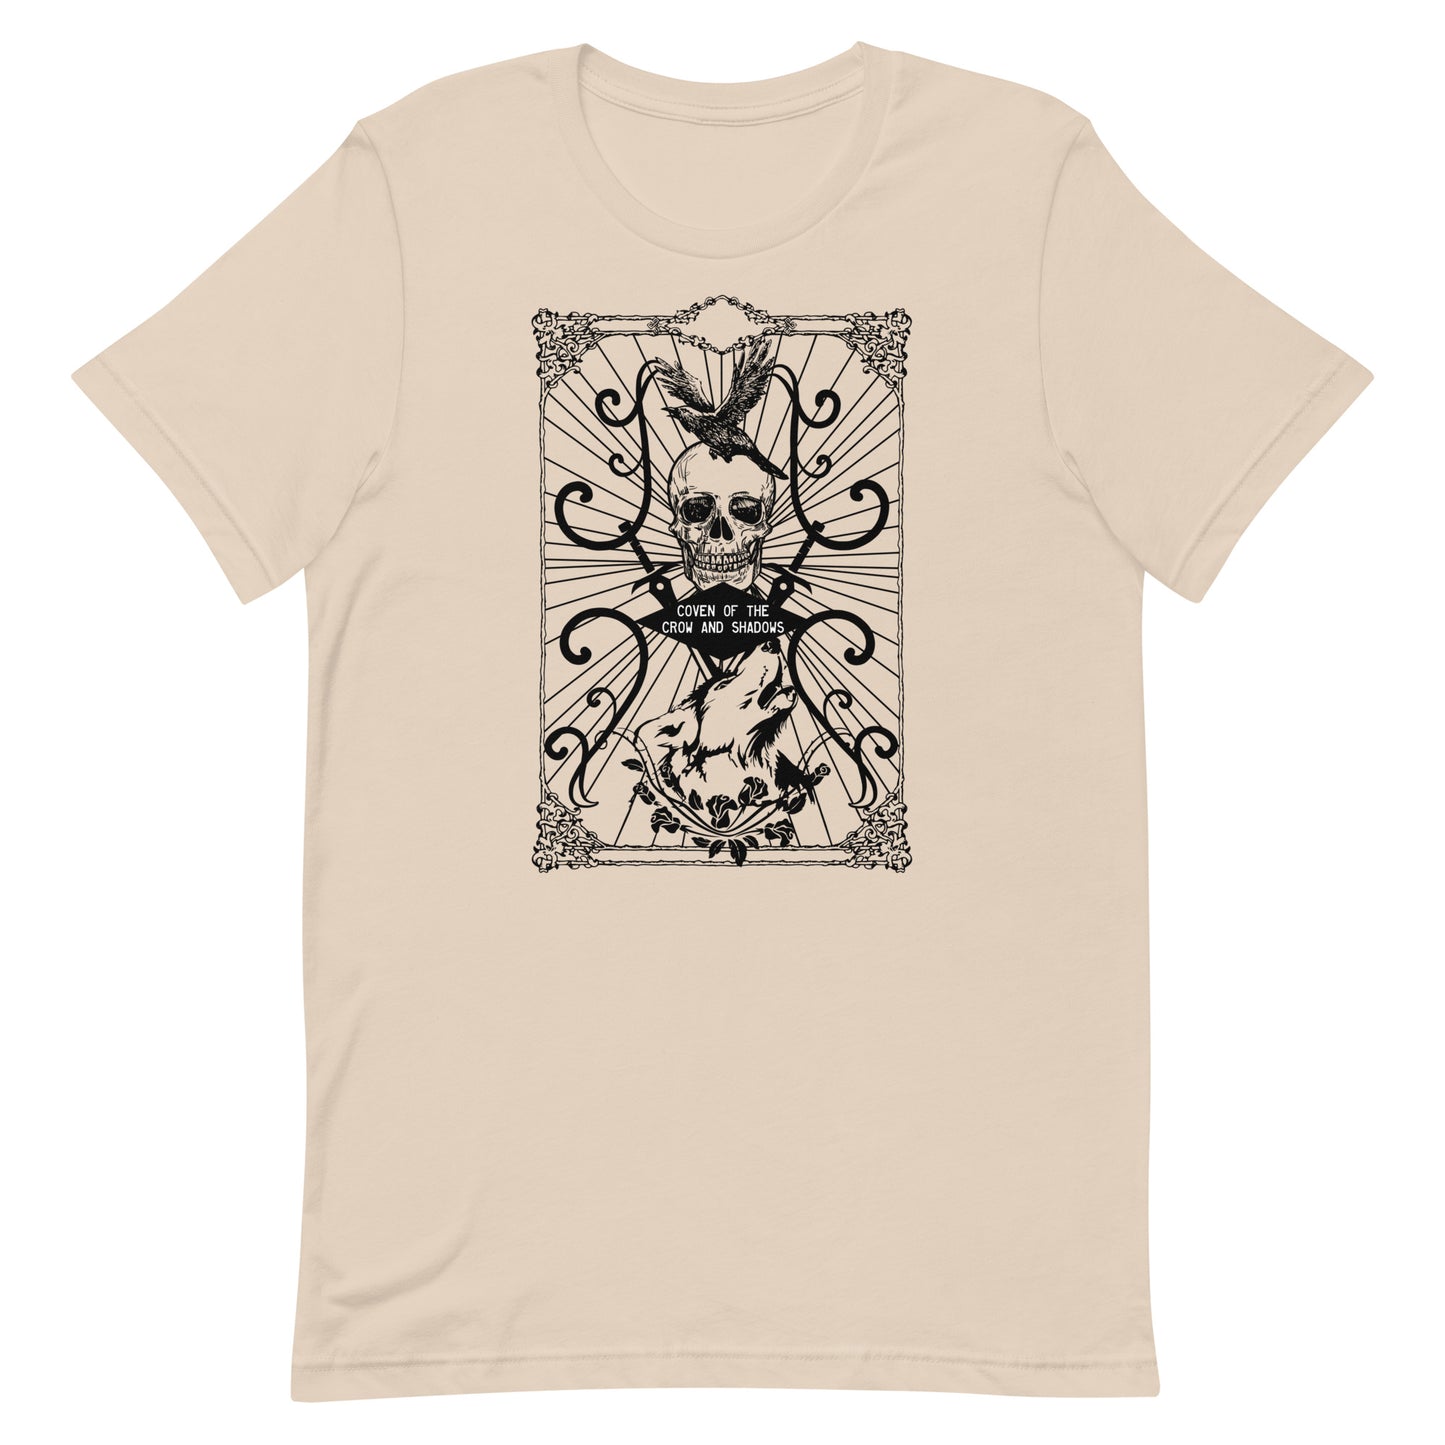 Coven of the Crow and Shadows Tee